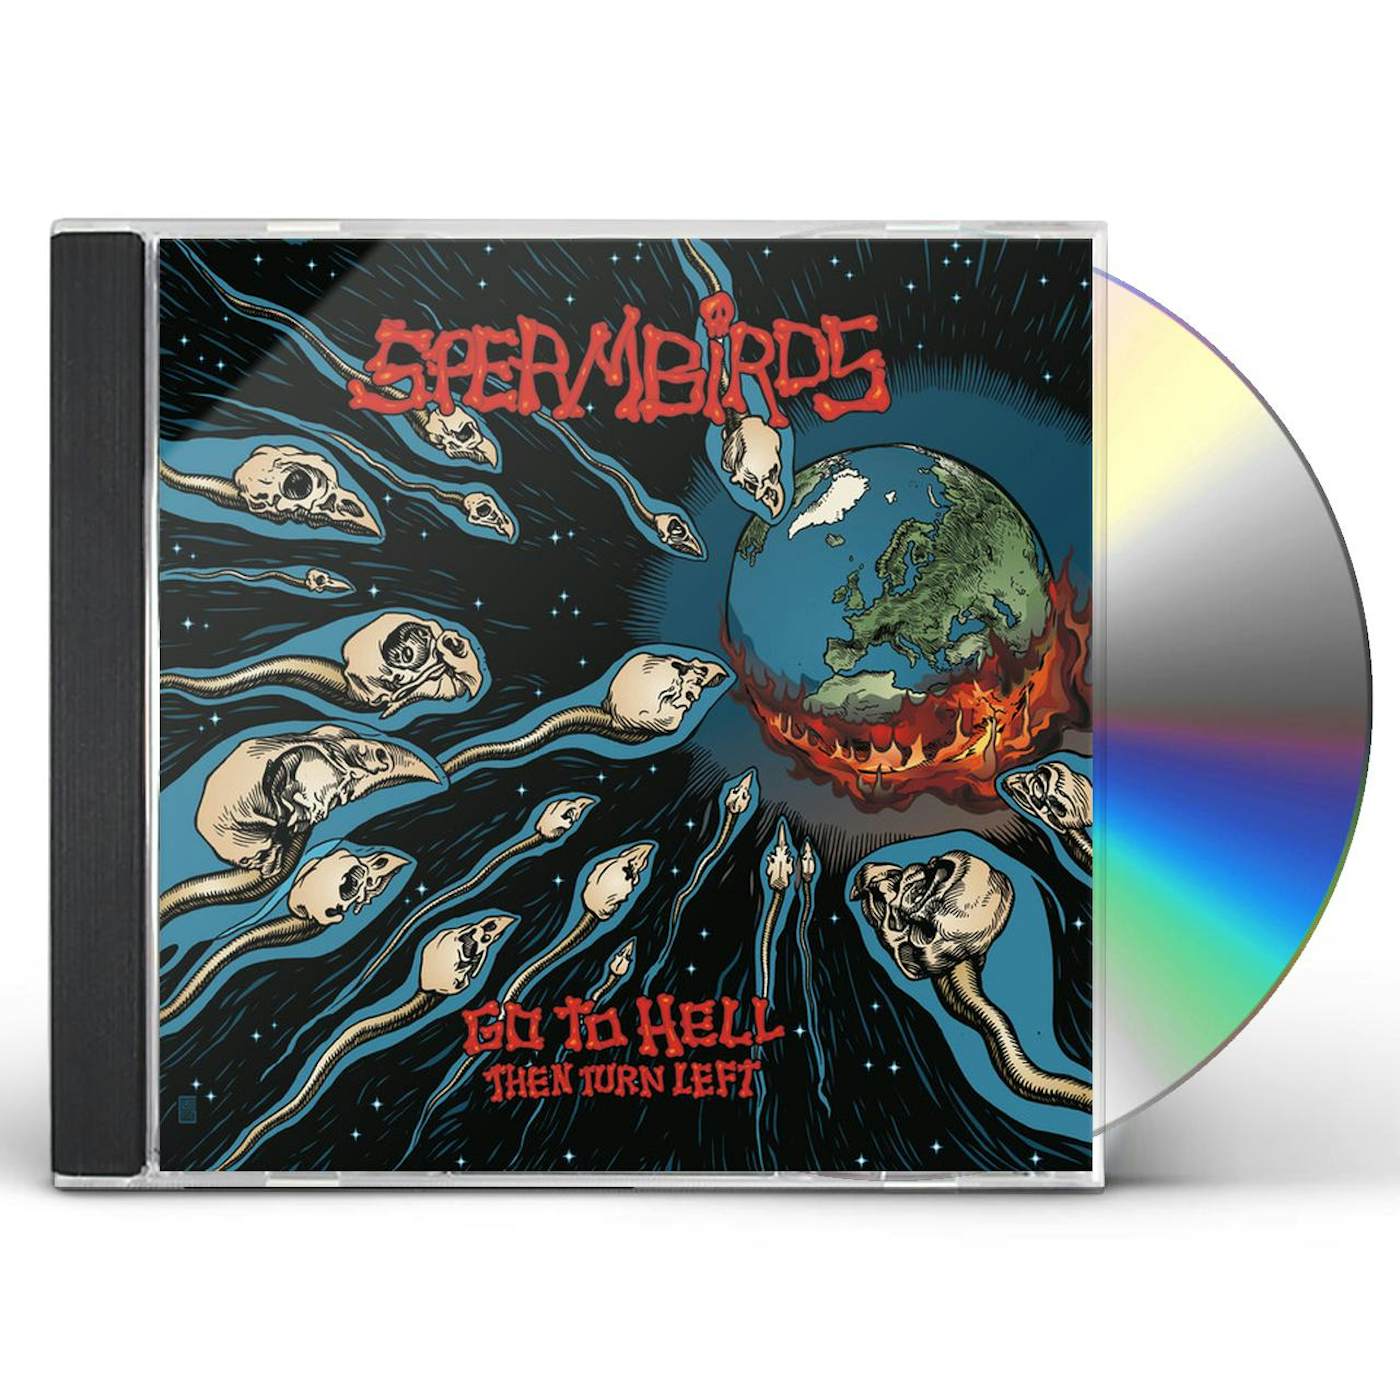 Spermbirds GO TO HELL THEN TURN LEFT CD